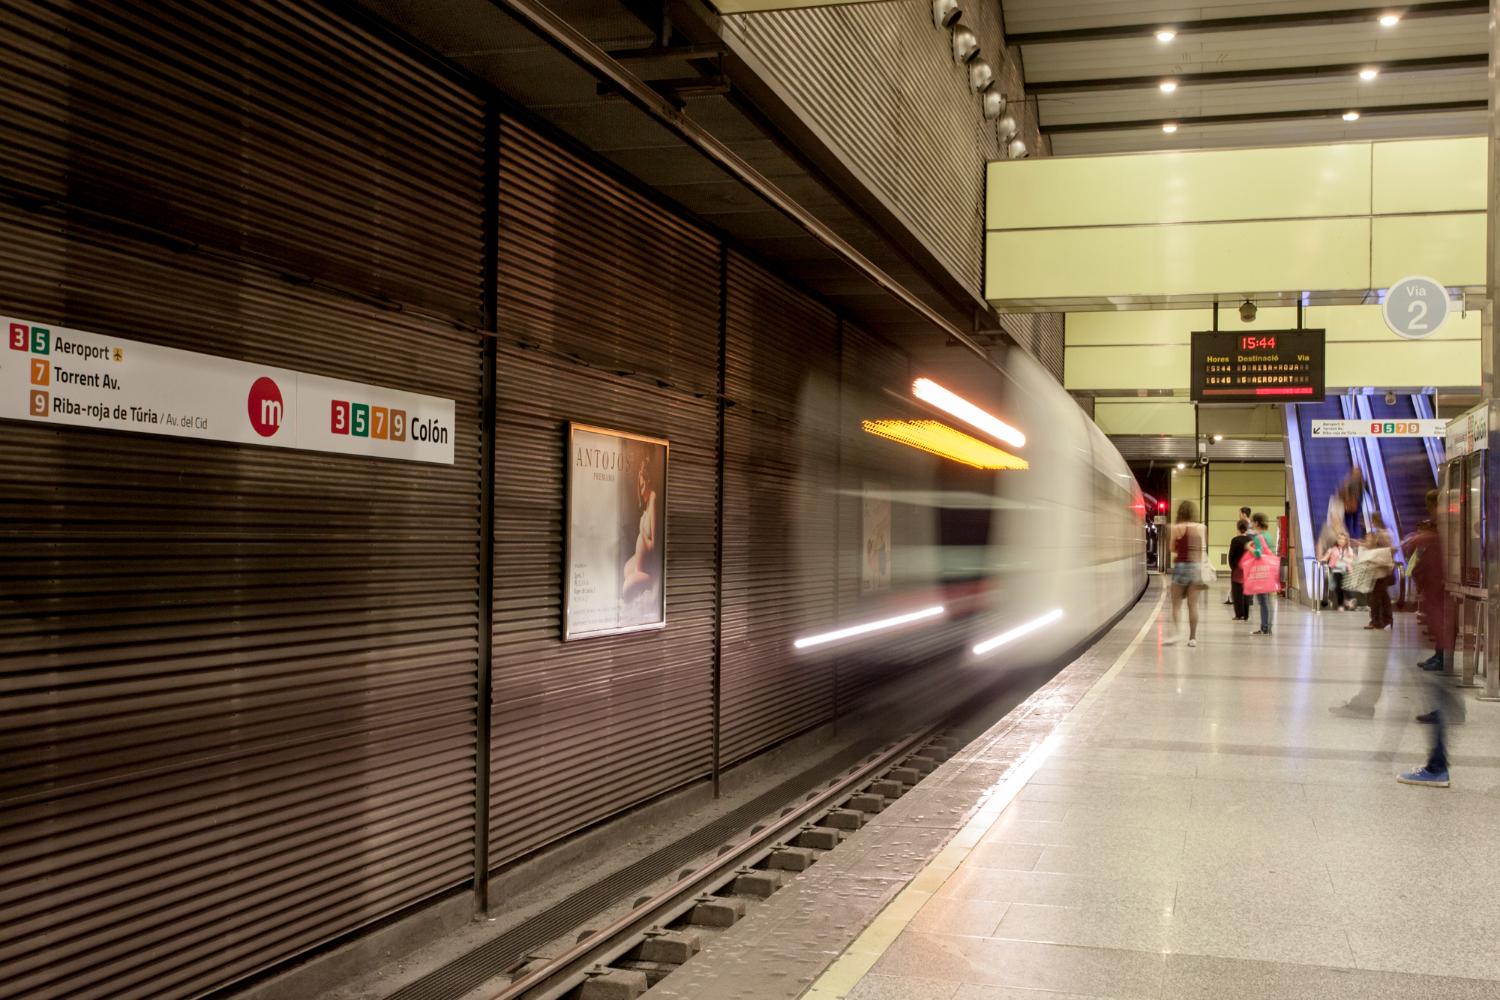 Smart ventilation systems are deployed at Barcelona's metro stations